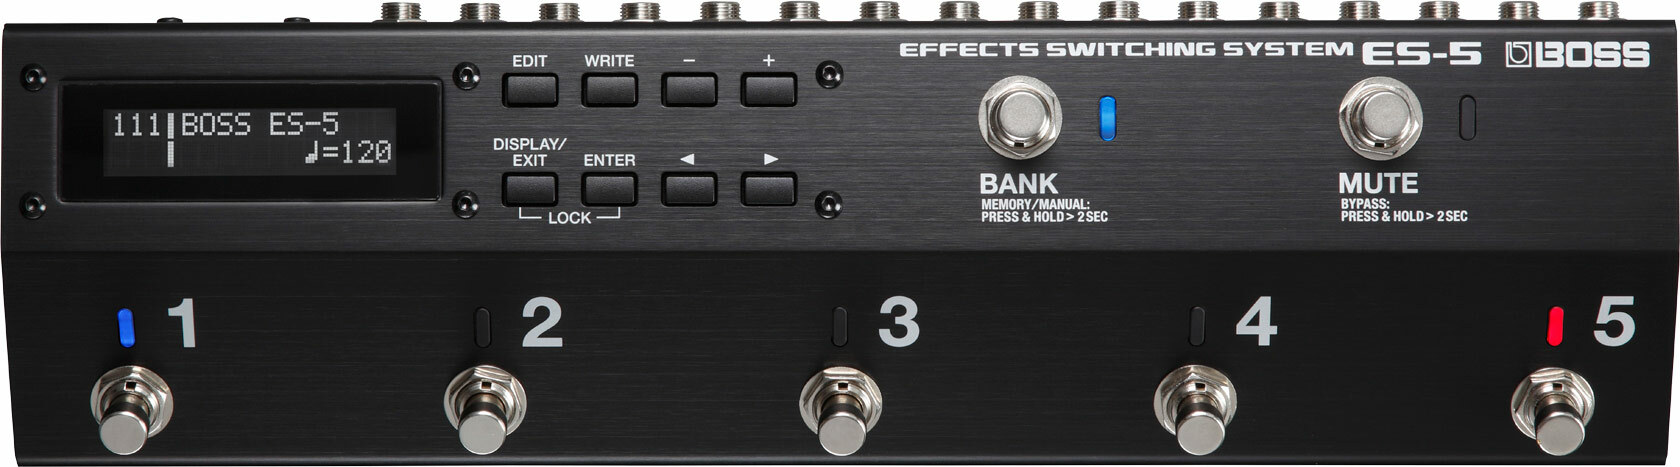 Boss Es-5 Effects Switching System - Pedalera de control - Main picture